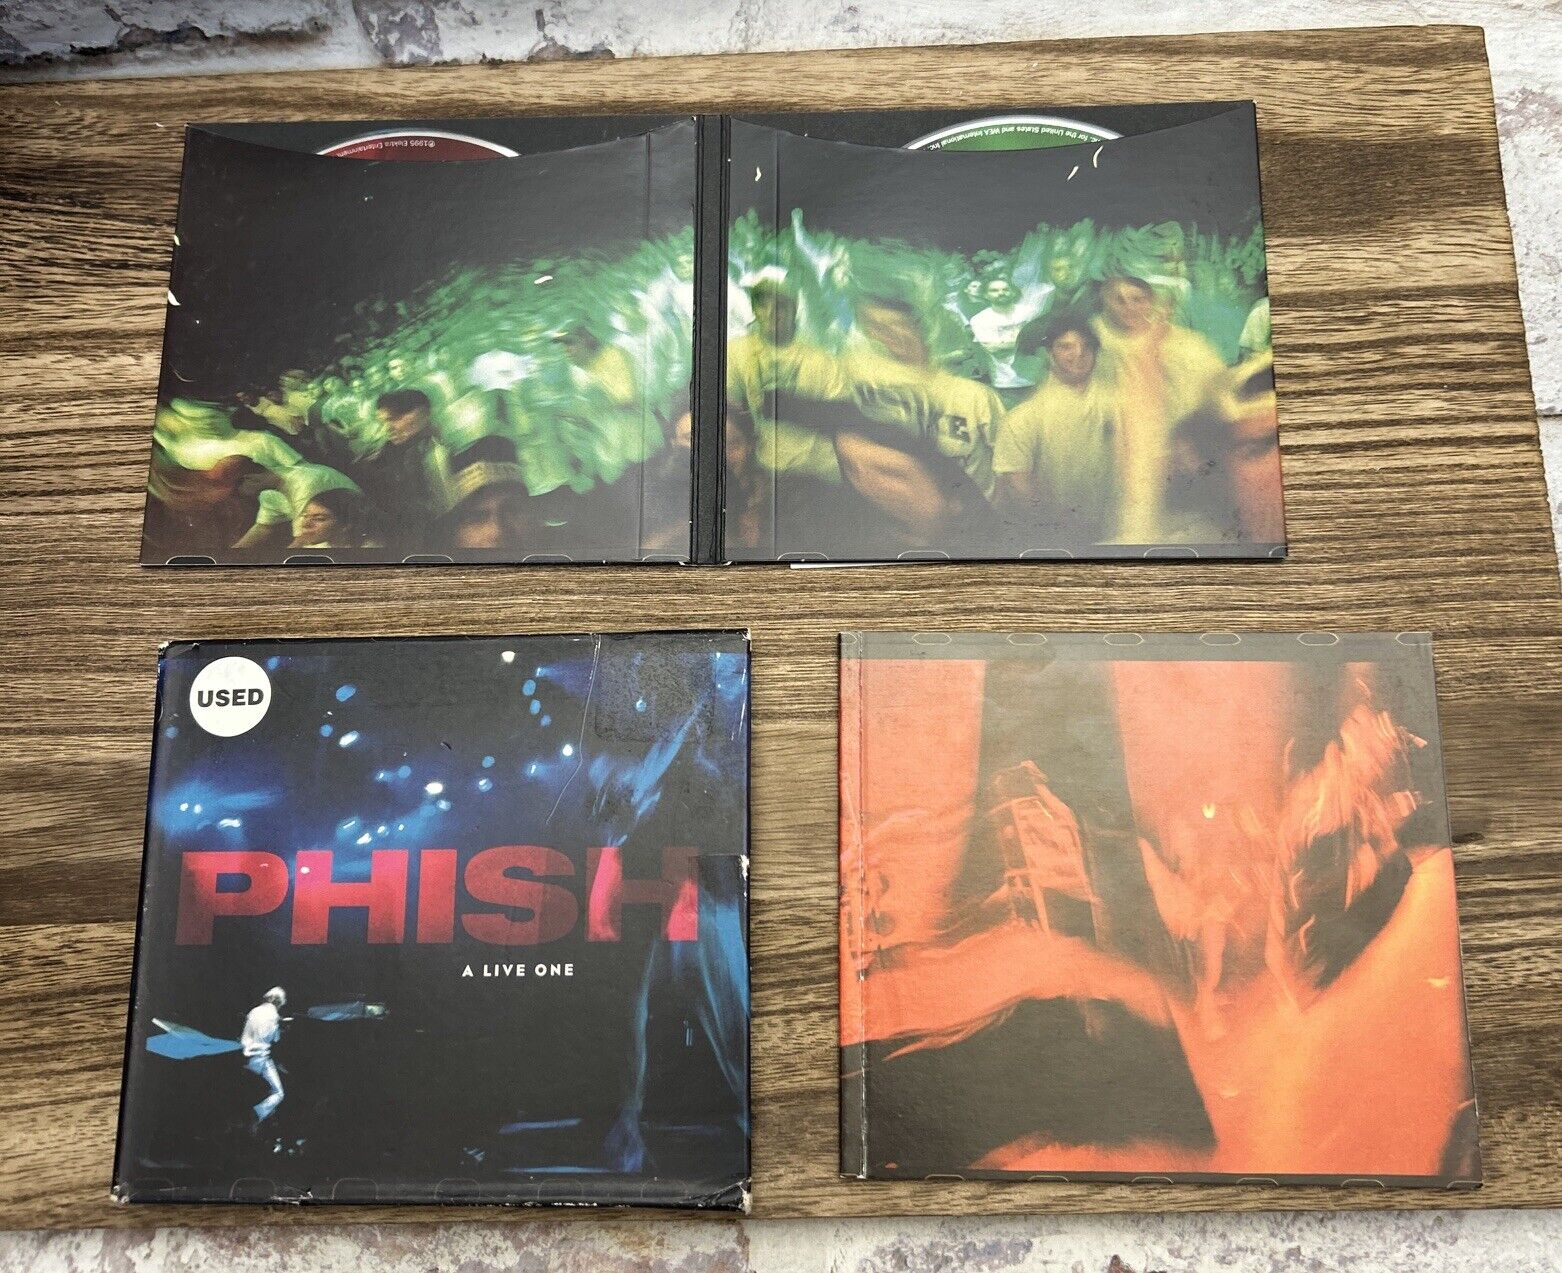 PHISH A Live One 2 Disc CD Elektra Entertainment 1995 Booklet